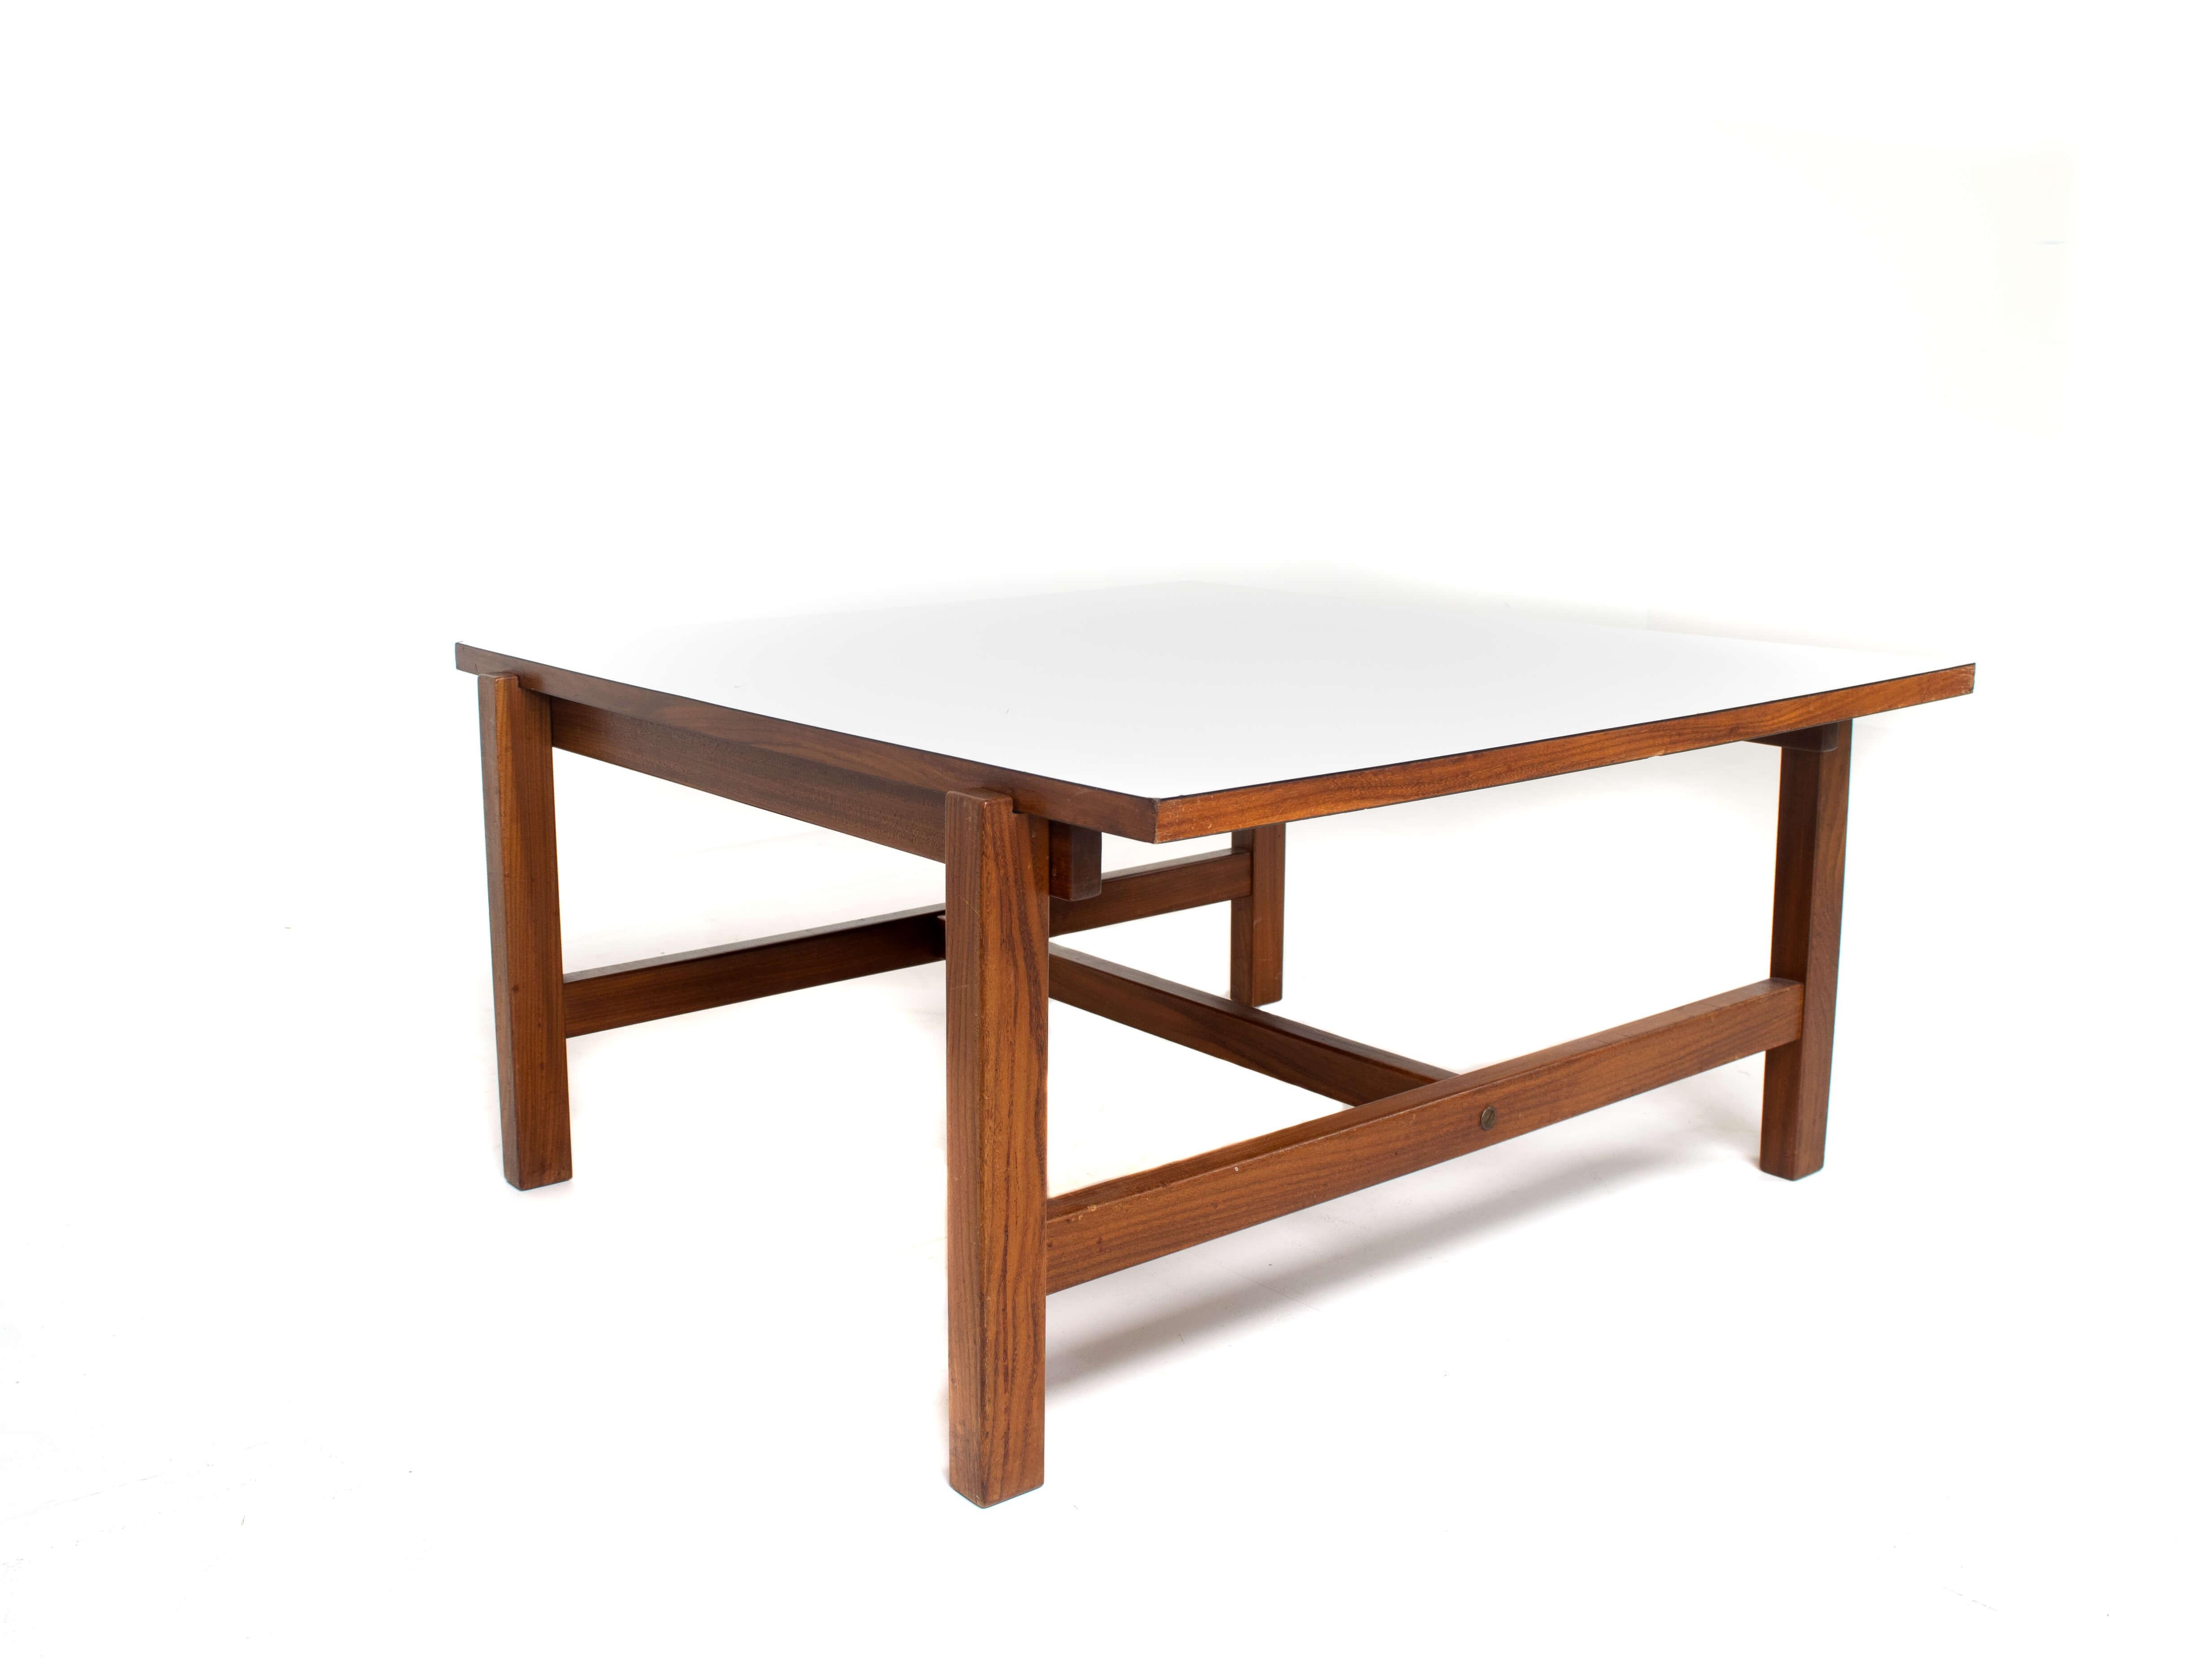 Pastoe coffee table Model TA 07 by Cees Braakman with reversible top, Netherlands 1950s. This Coffee Table is made of Teak Wood and has a reversible top with teak veneer on one side and a white formica layer on the other side. It really gives this